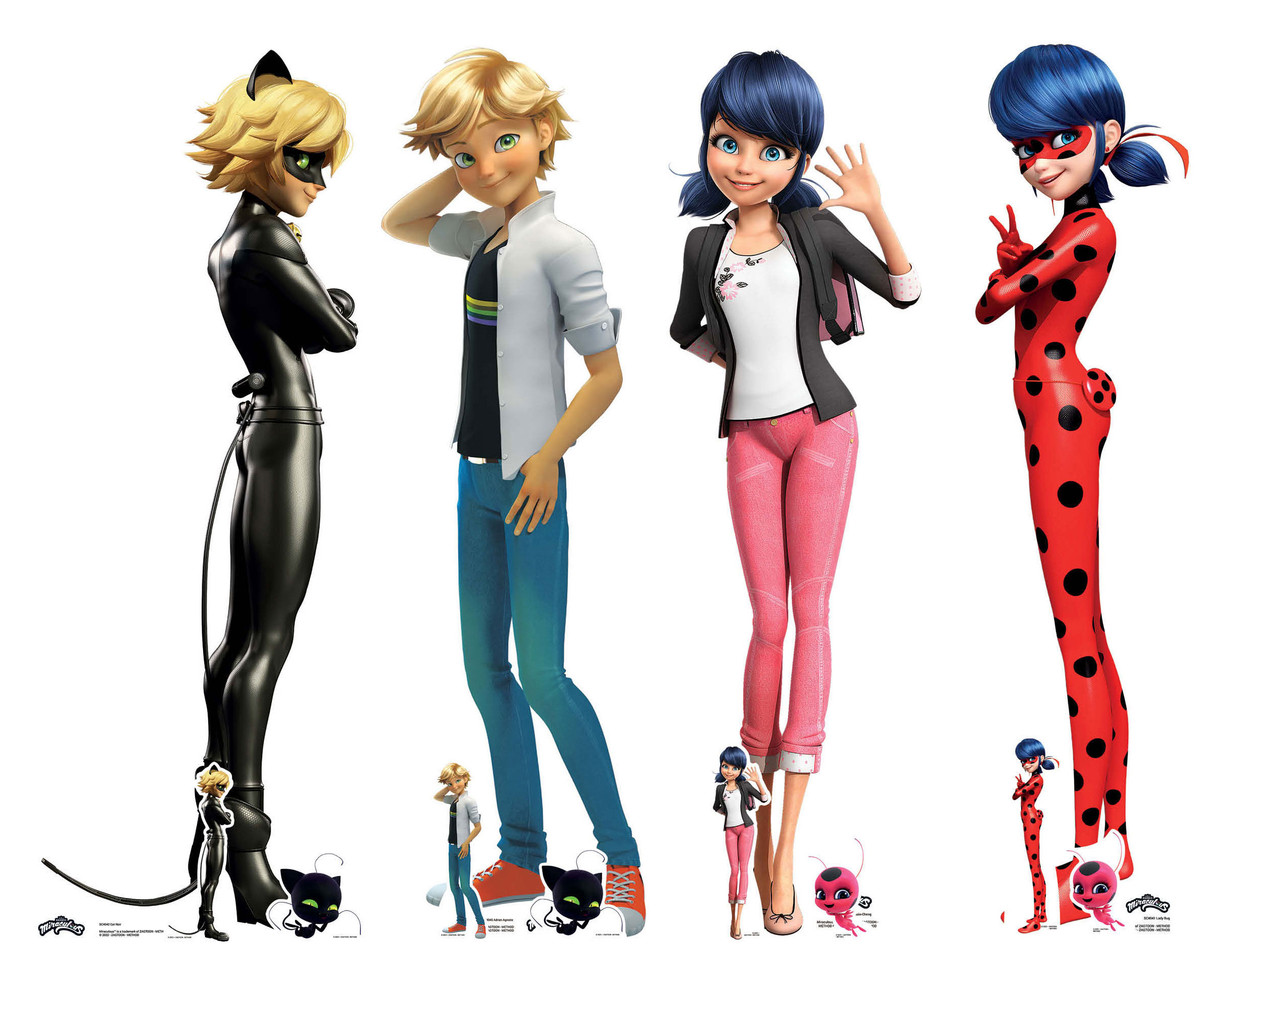 Implacable Ejecutar ola Marinette, Ladybug Adrien Agreste and Cat Noir from Miraculous Cardboard  Cutouts Set of 4